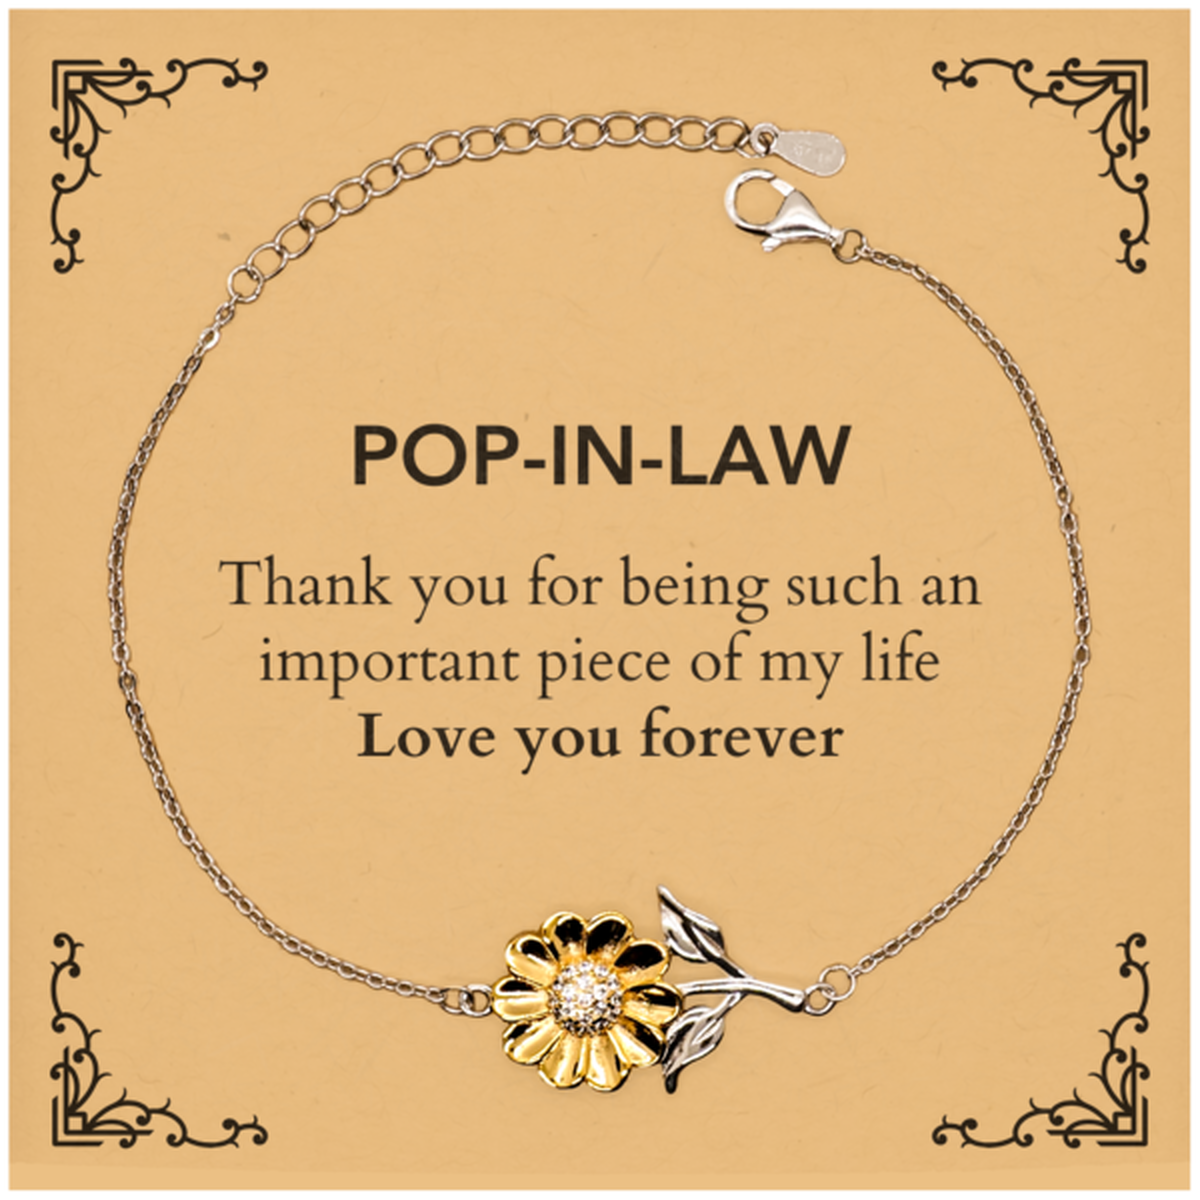 Appropriate Pop-in-law Sunflower Bracelet Epic Birthday Gifts for Pop-in-law Thank you for being such an important piece of my life Pop-in-law Christmas Mothers Fathers Day